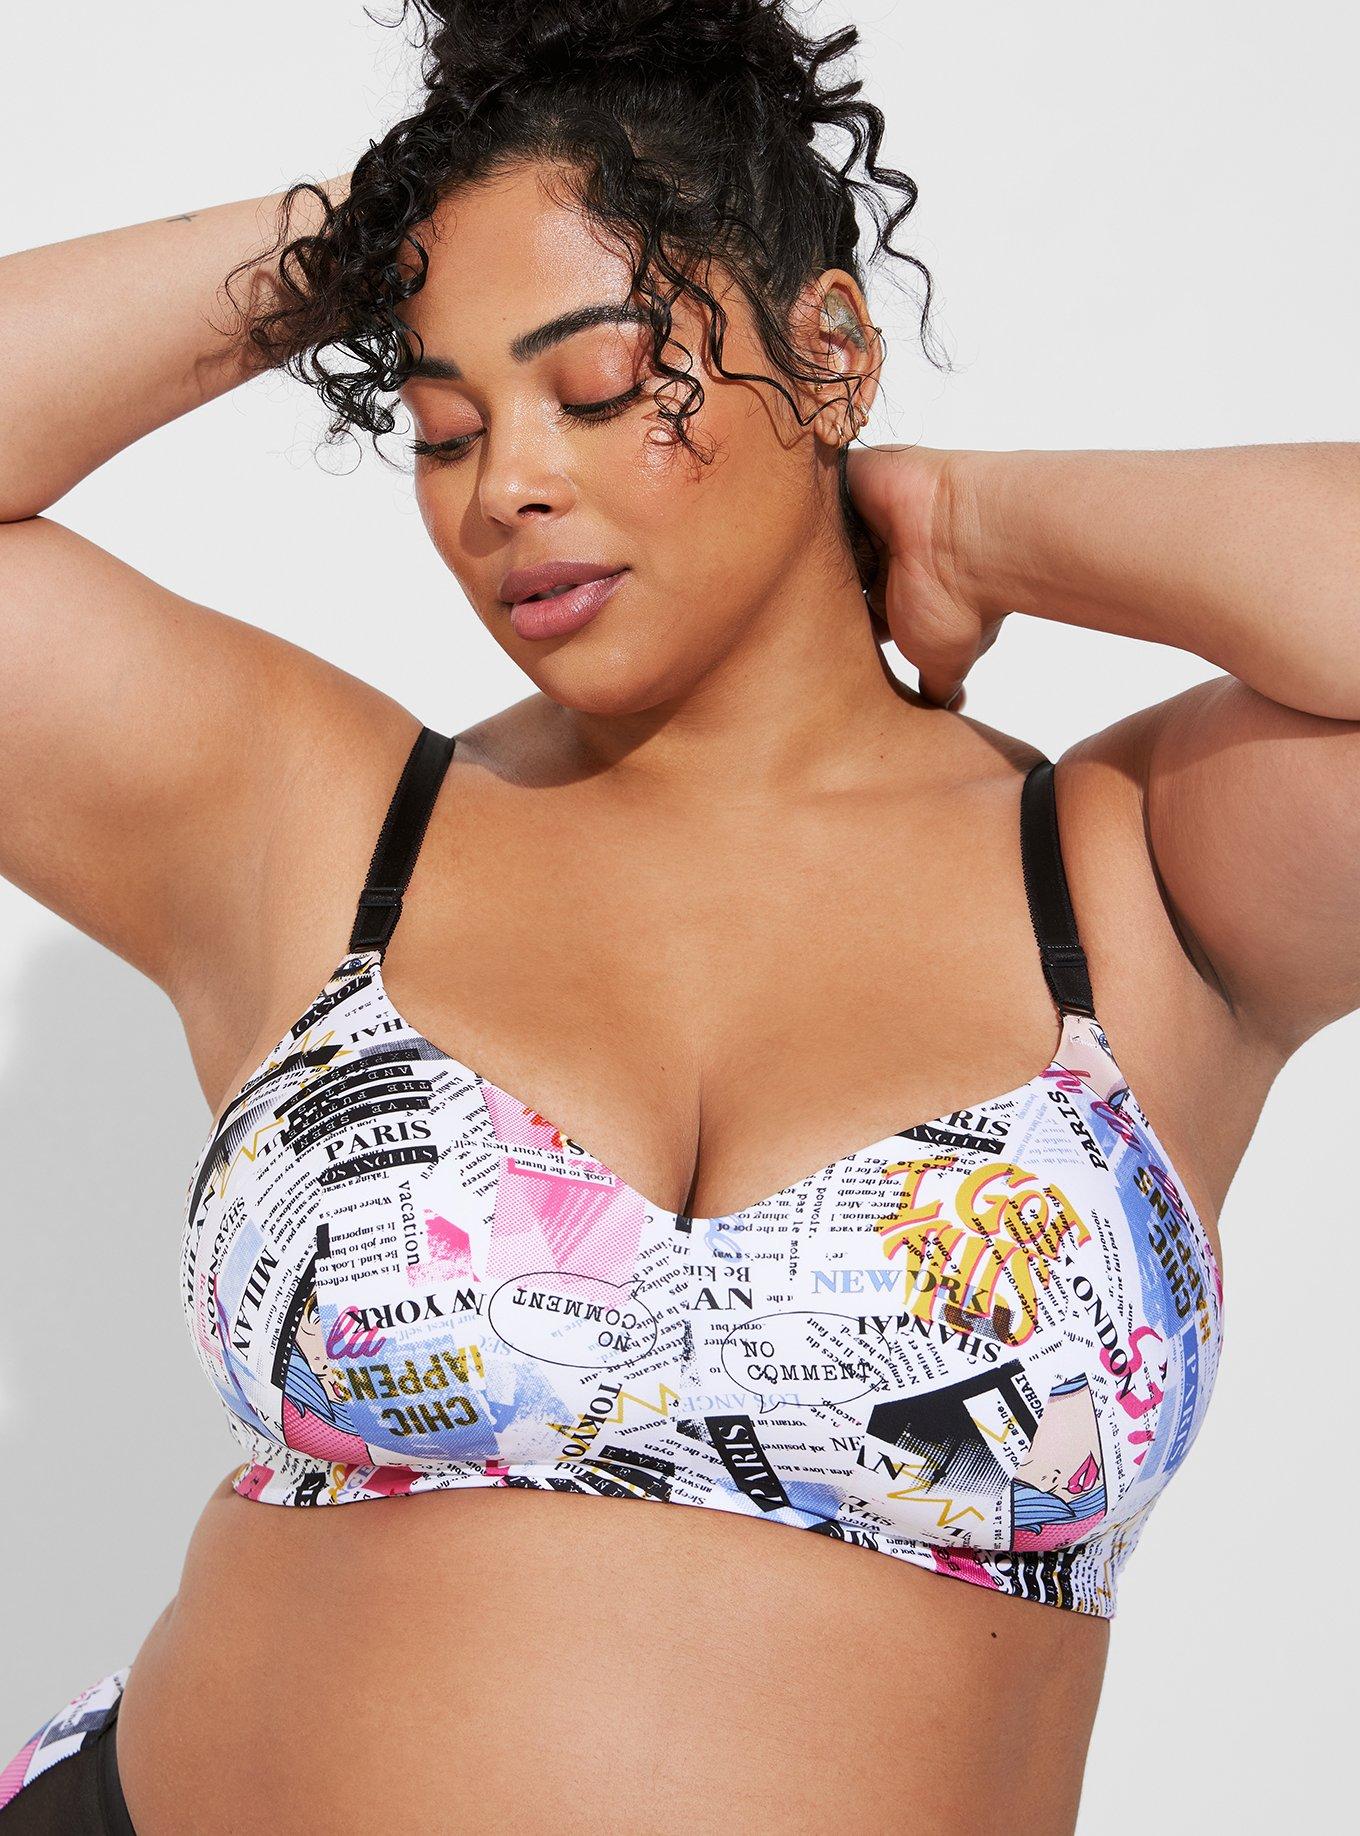 Torrid Bra! Dotted Lace! Back-Smoothing! Sizes 46B & 44C, 46C, 38D